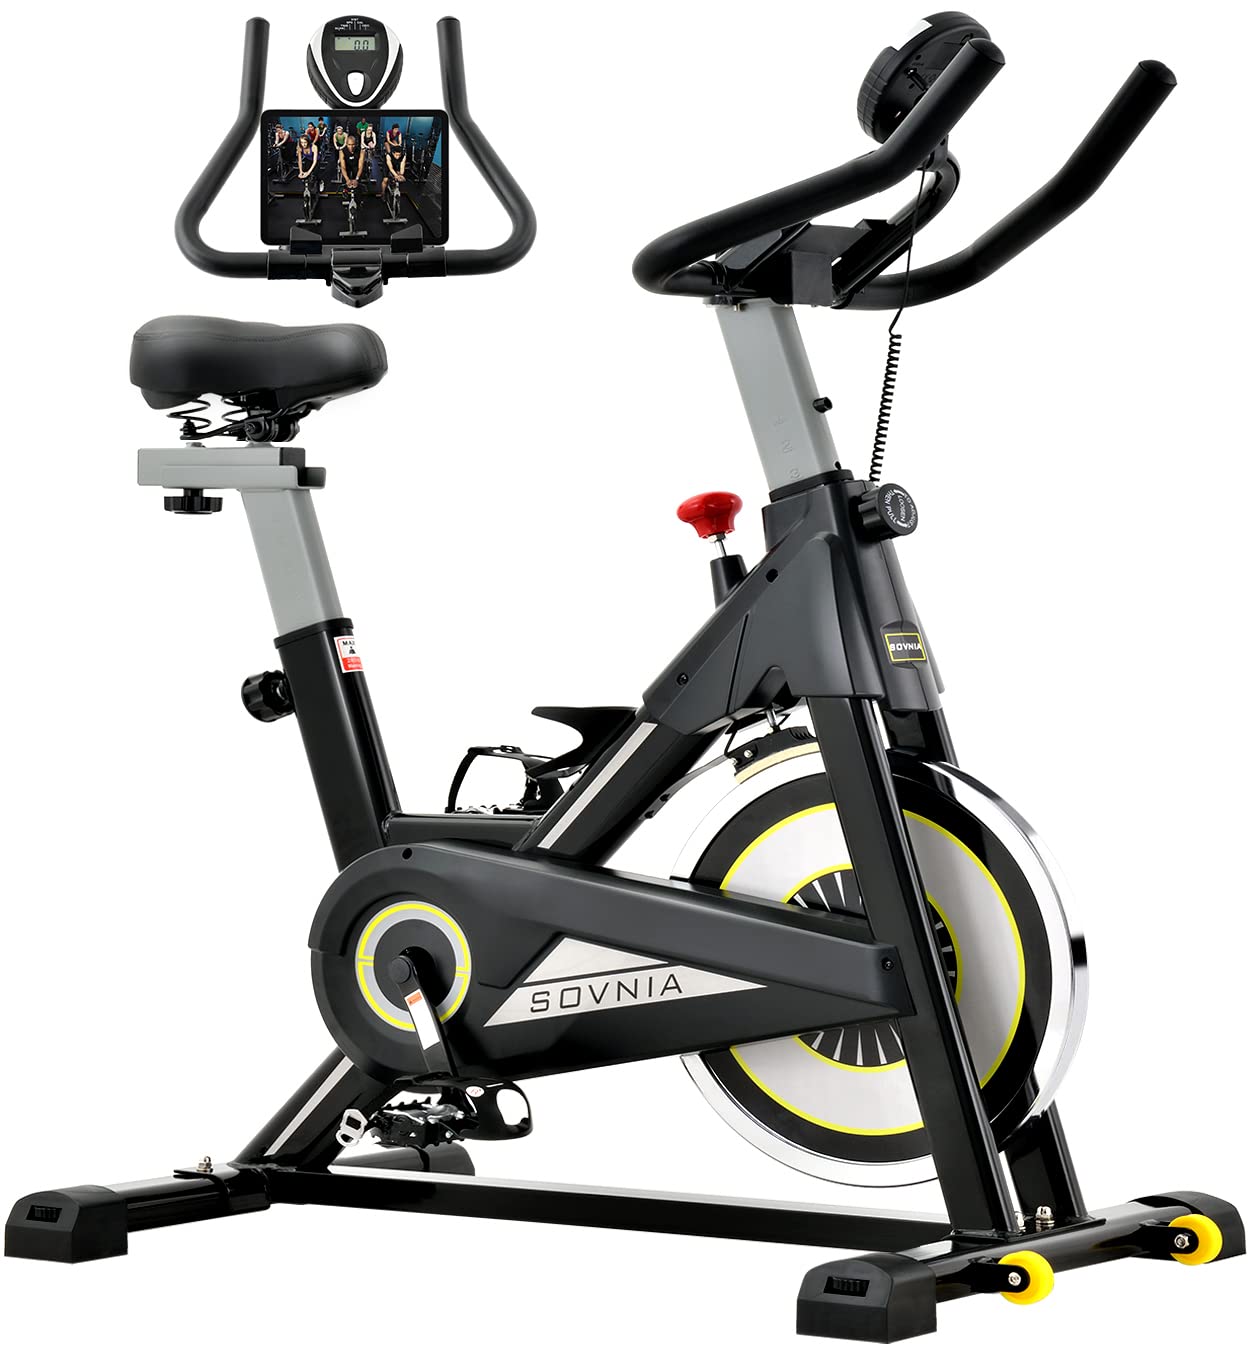 Review of the Sovnia Exercise Bike